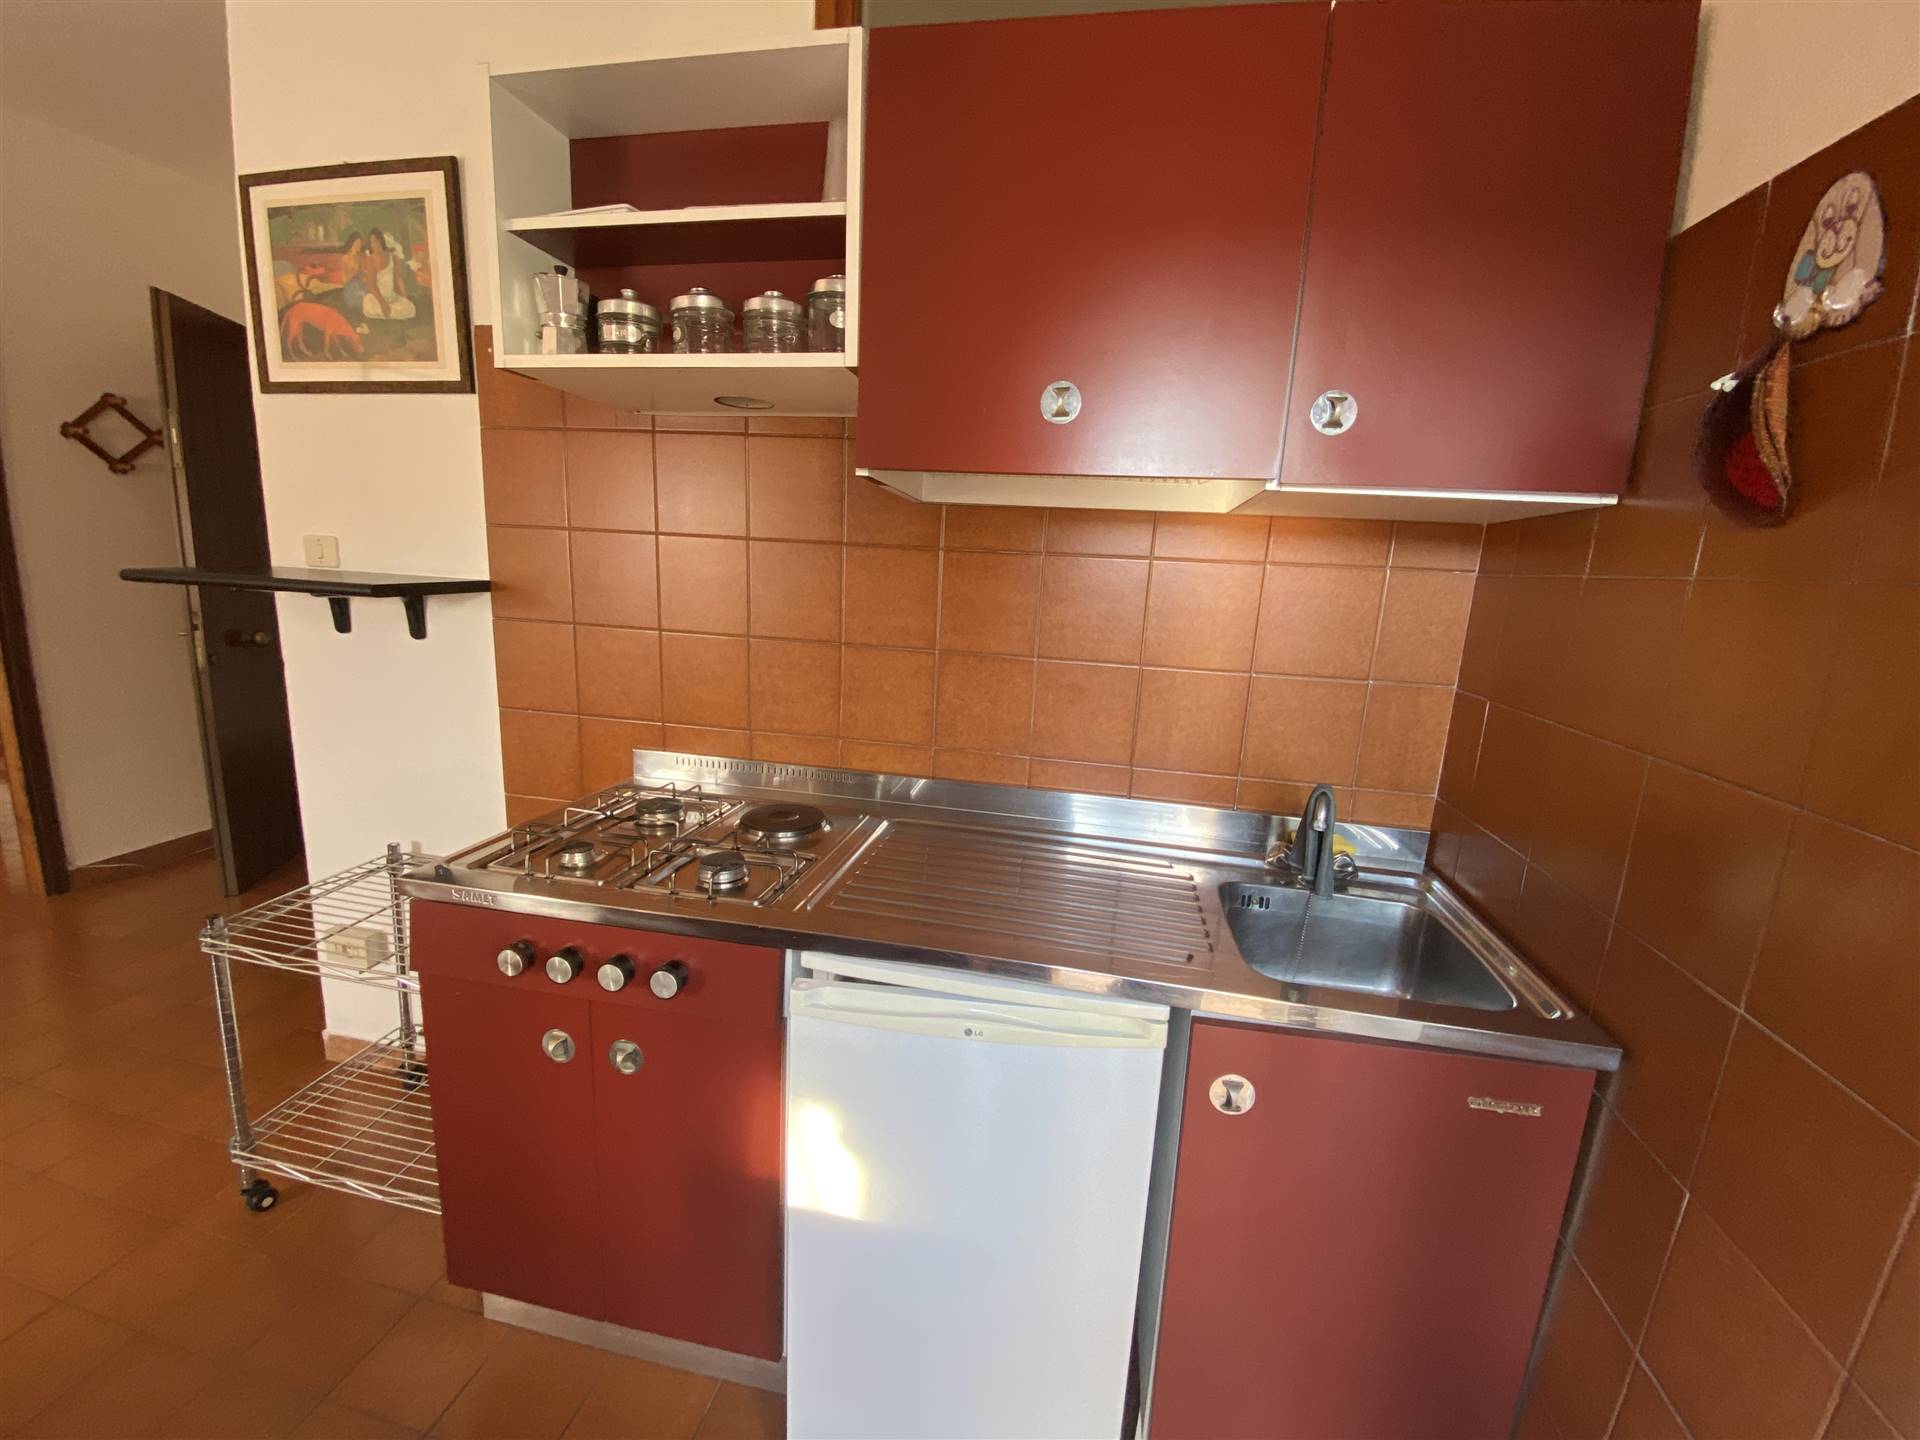 SOTTOMARINA, CHIOGGIA, Apartment for rent of 40 Sq. mt., Habitable, Heating Individual heating system, Energetic class: G, placed at 3° on 3, 